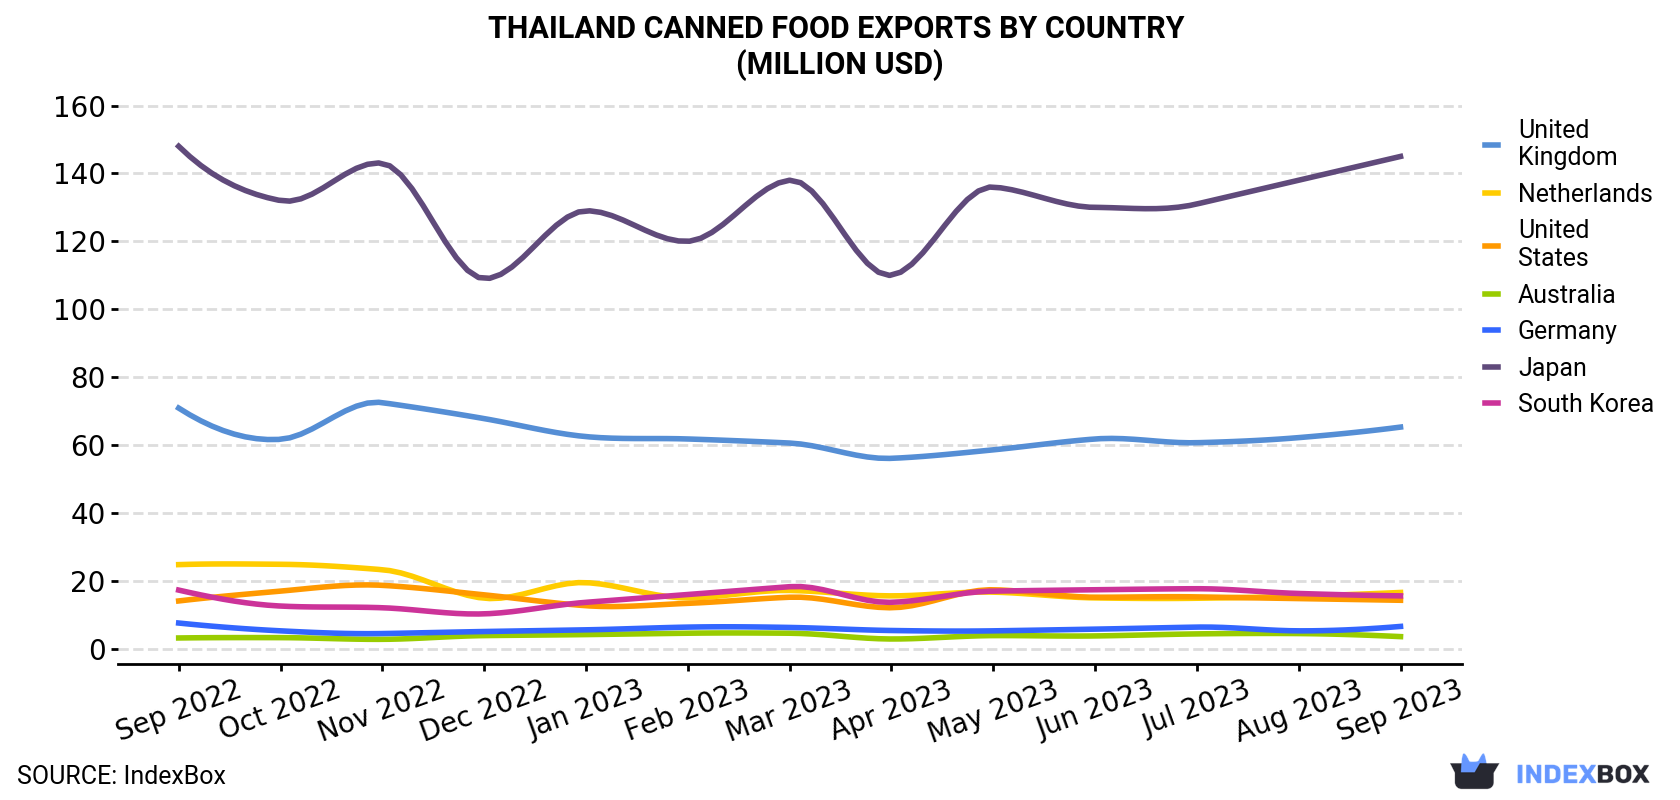 Thailand Canned Food Exports By Country (Million USD)